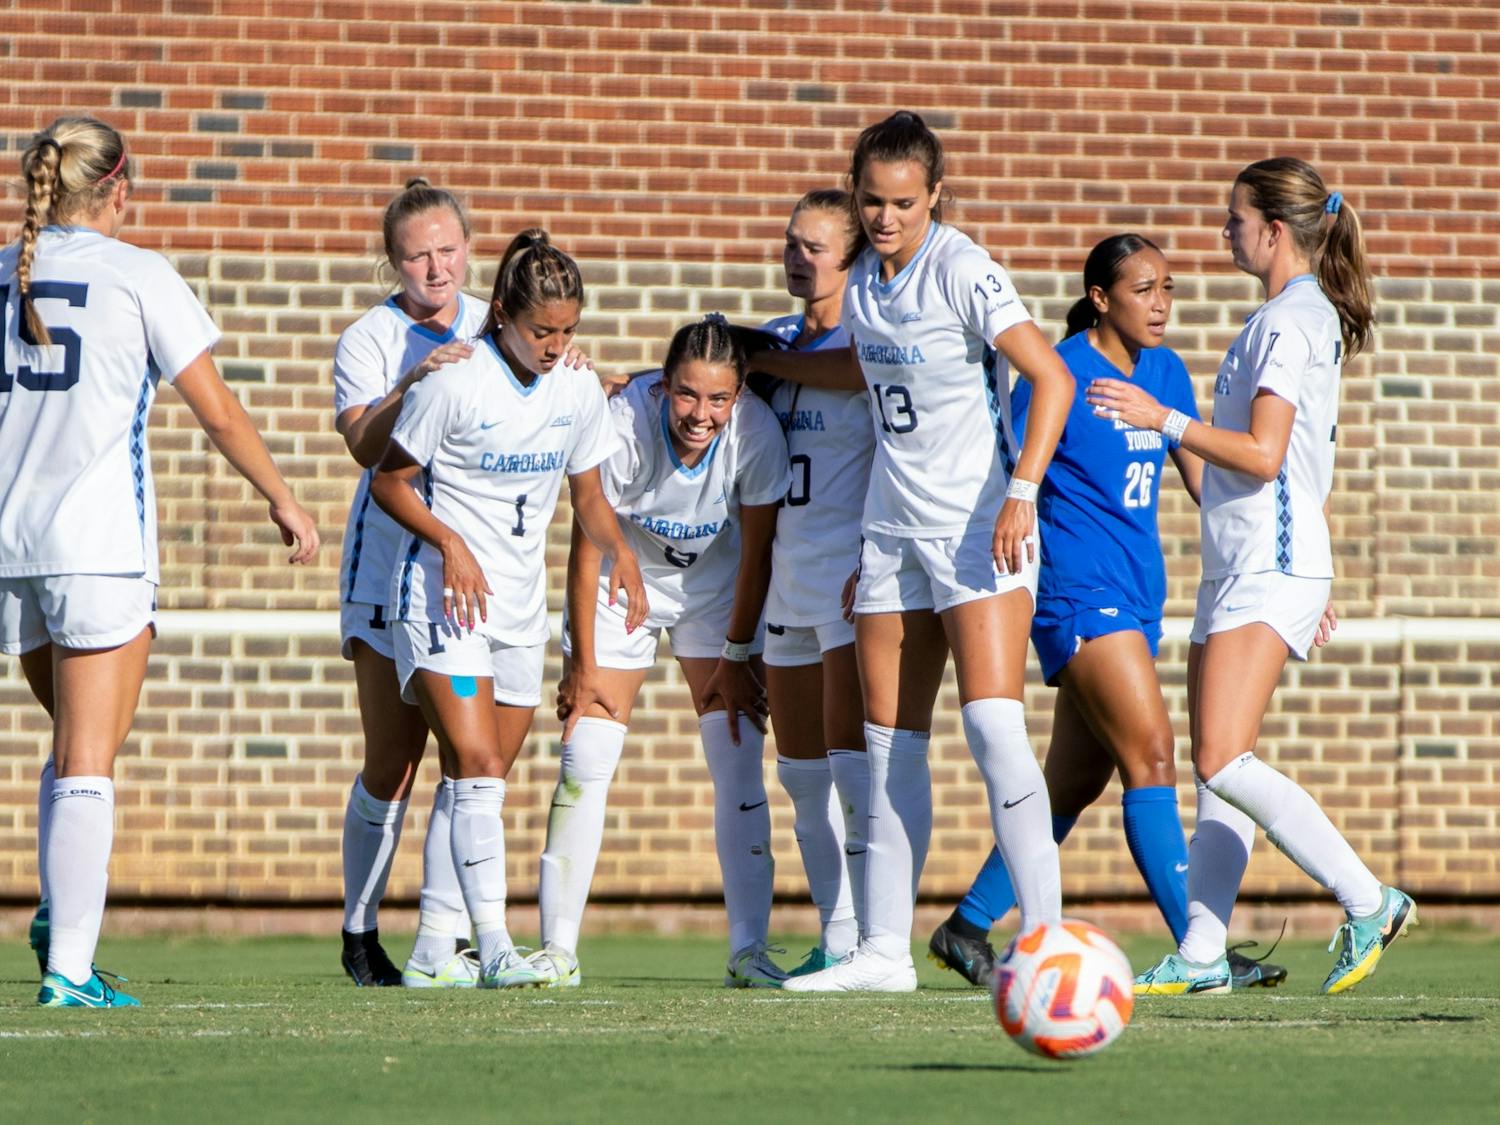 Freshman forward Tori Dellaperuta (9) is embraced by her teammates after scoring her second goal in as many games on Aug. 13, 2022. UNC beat BYU 2-0 at Dorrance Field in their second exhibition match of the season.